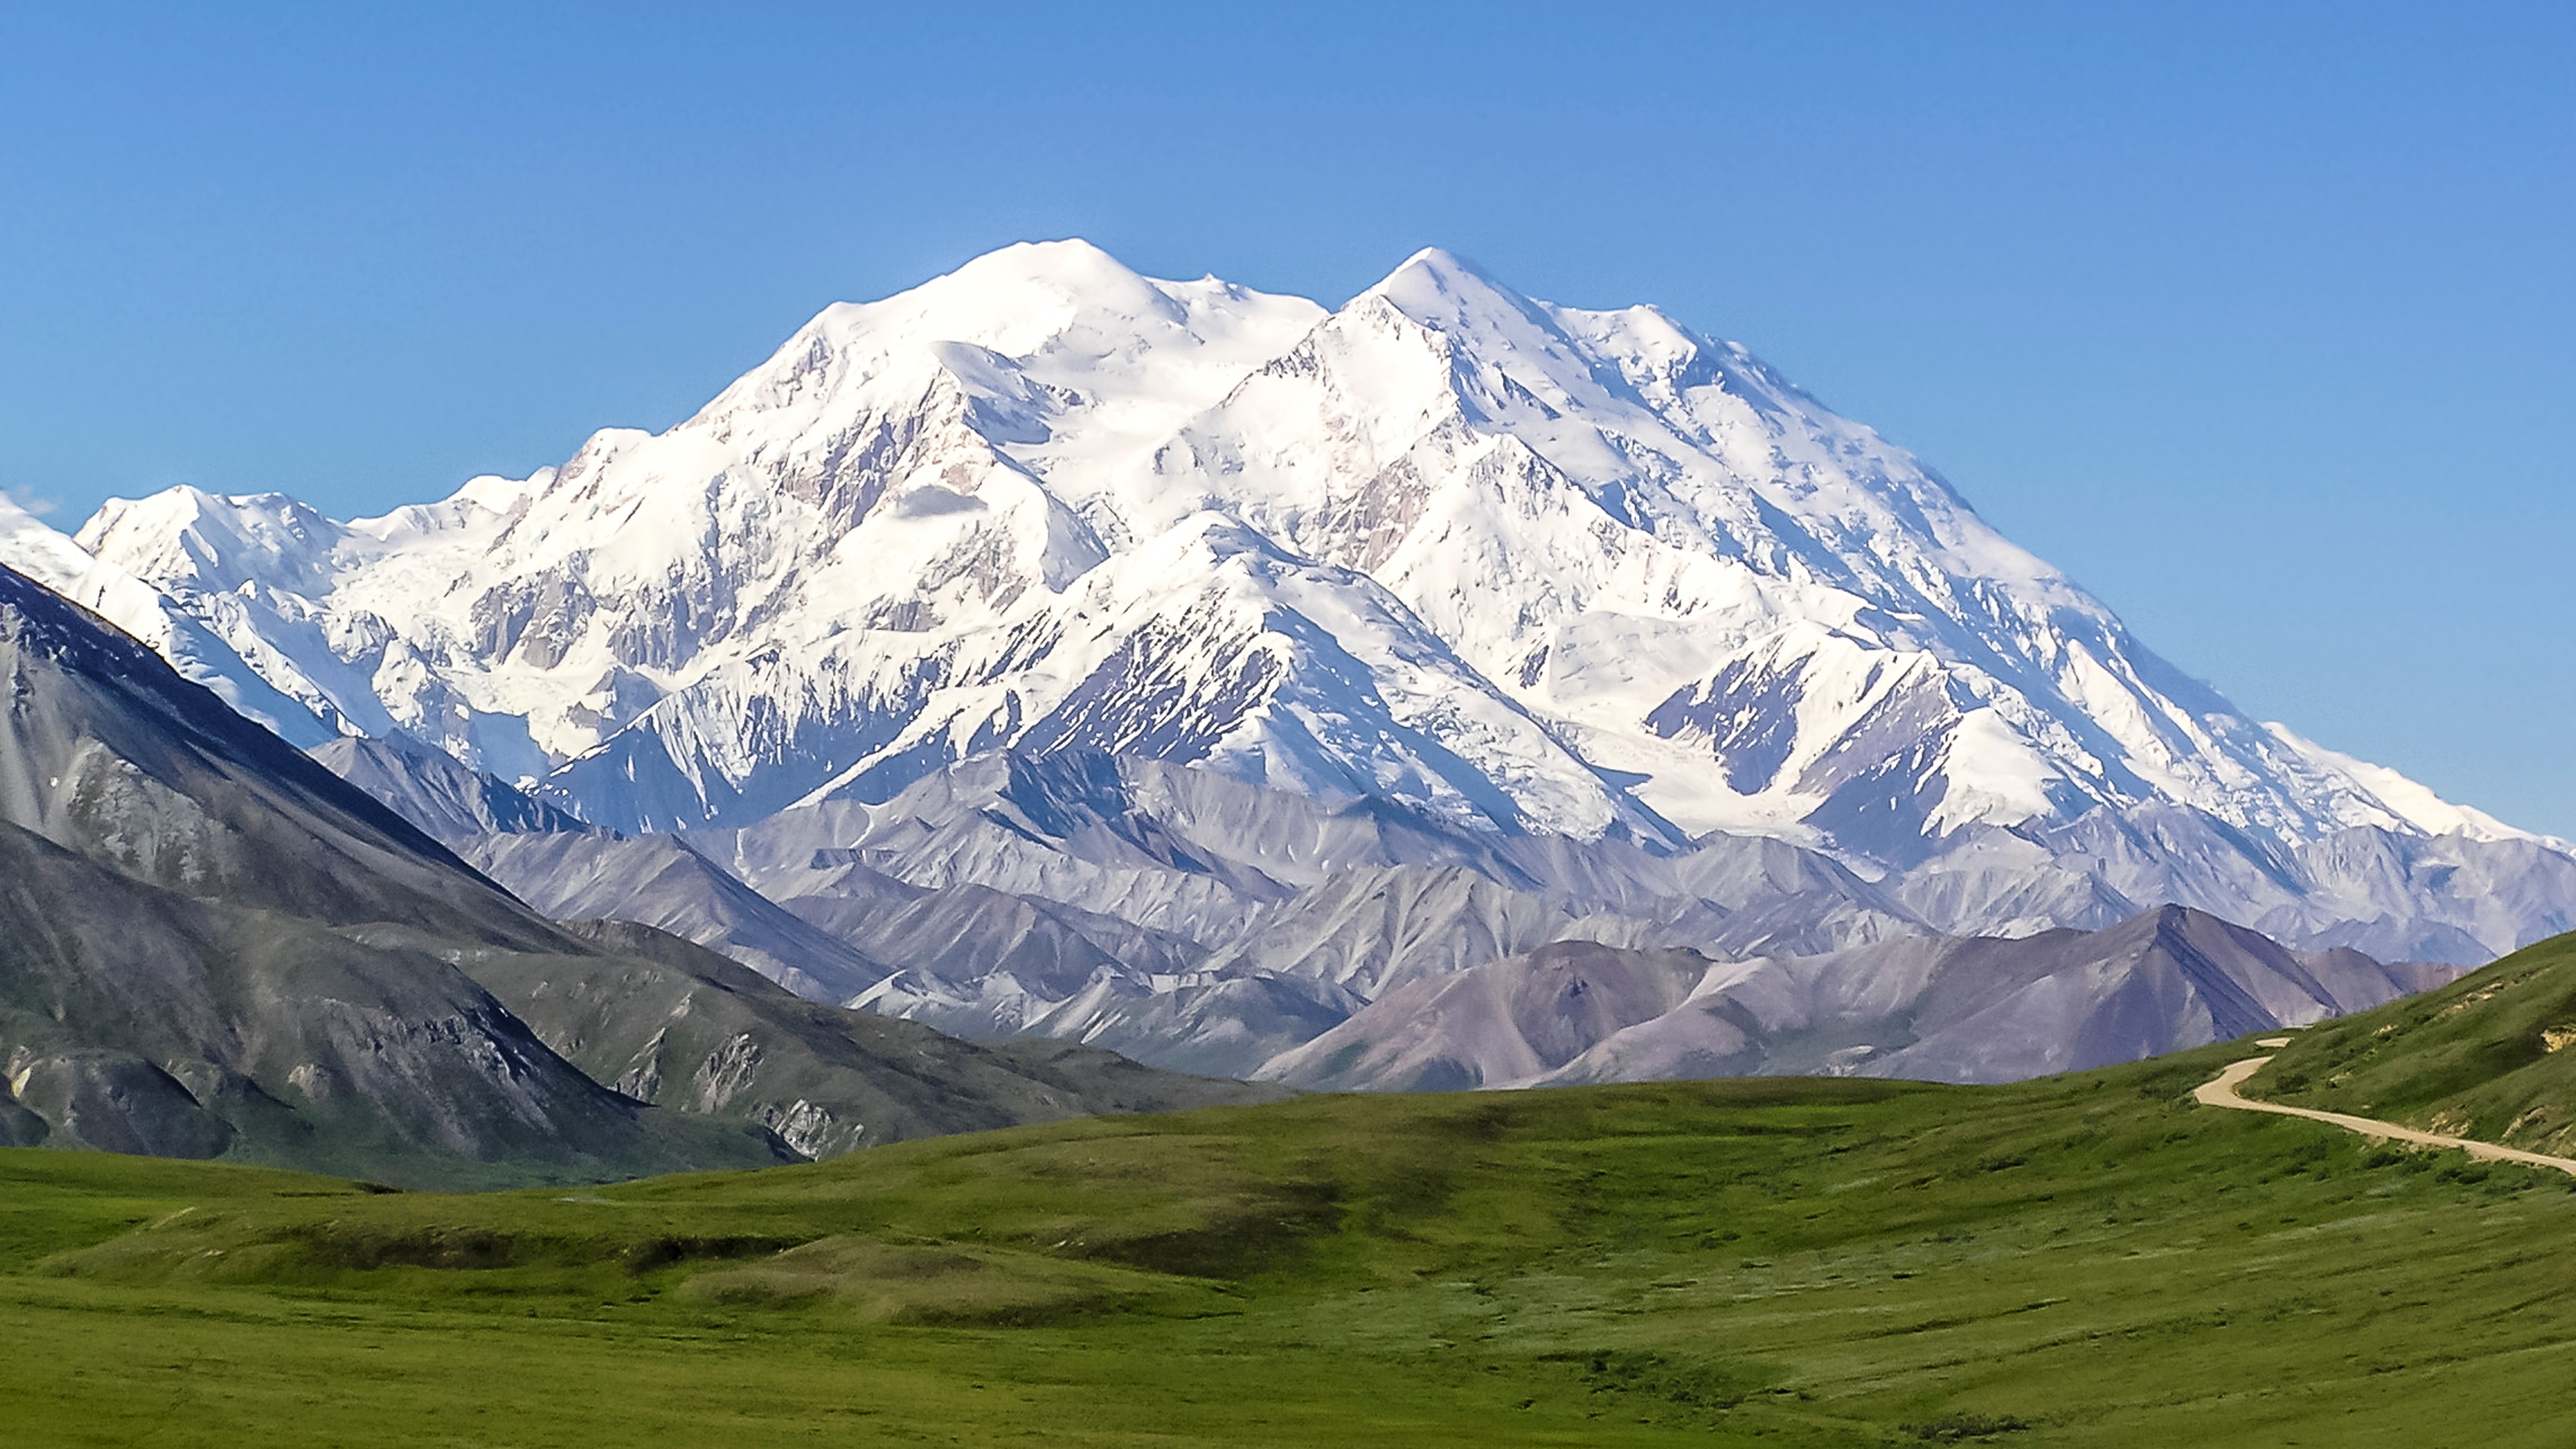 Mount Denali on a clear day with blue sky and snow covered peaks